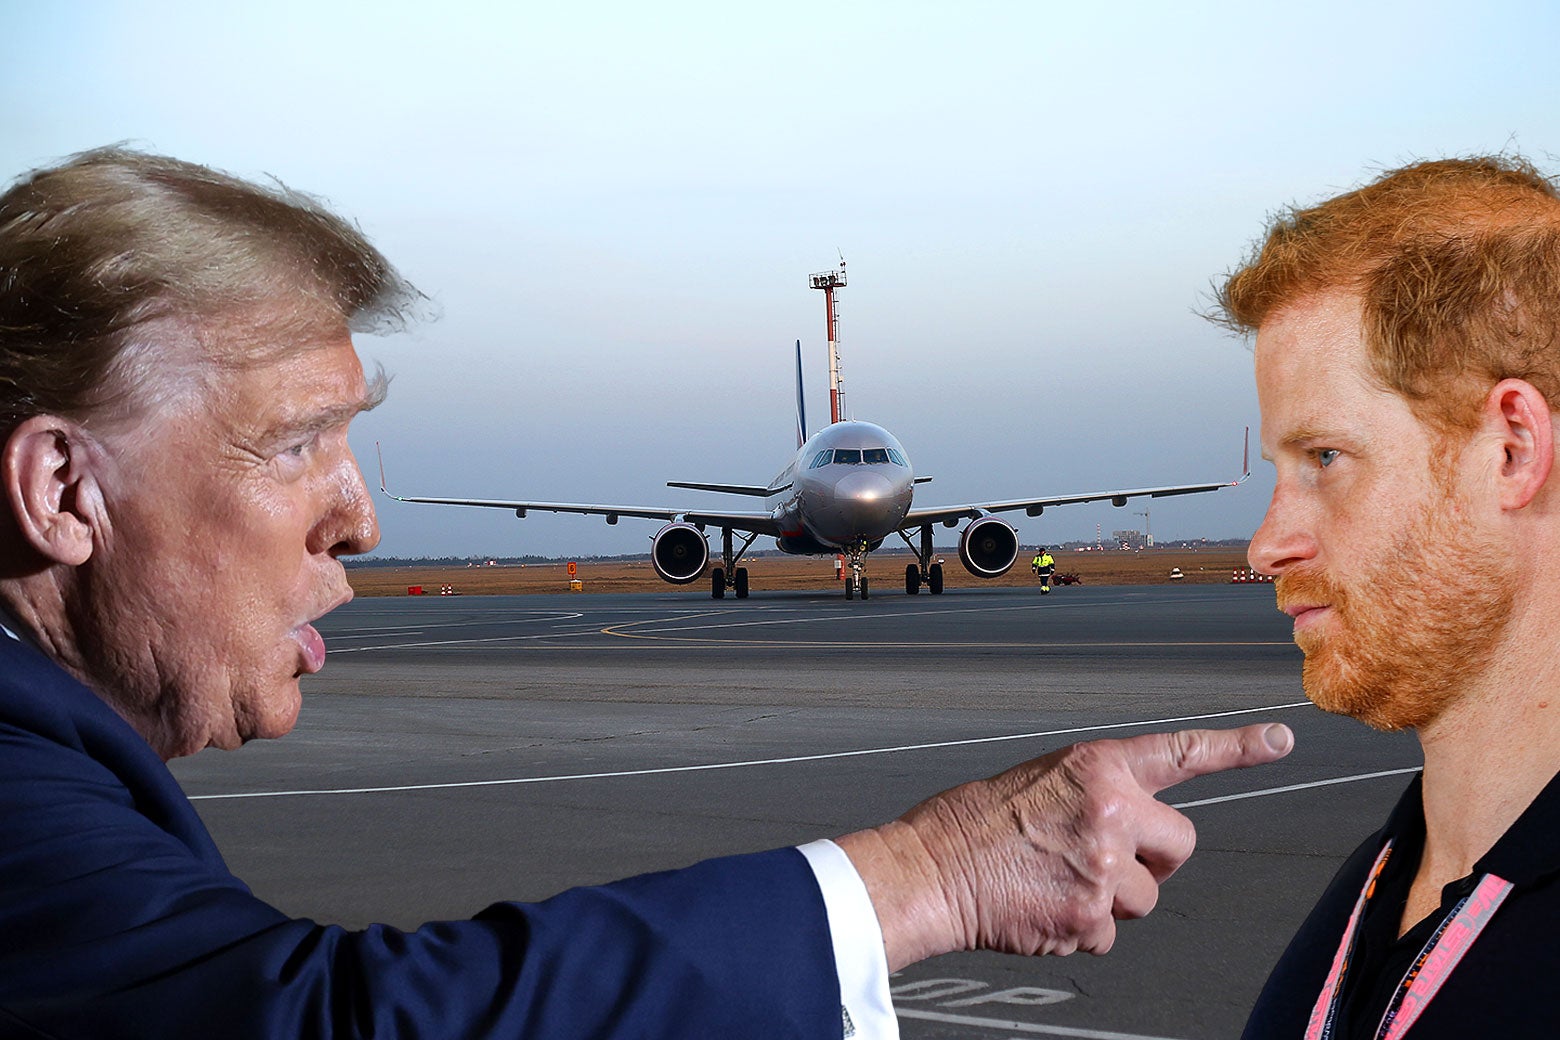 Donald Trump points angrily in Prince Harry's face; behind them is an airport and airplane. 